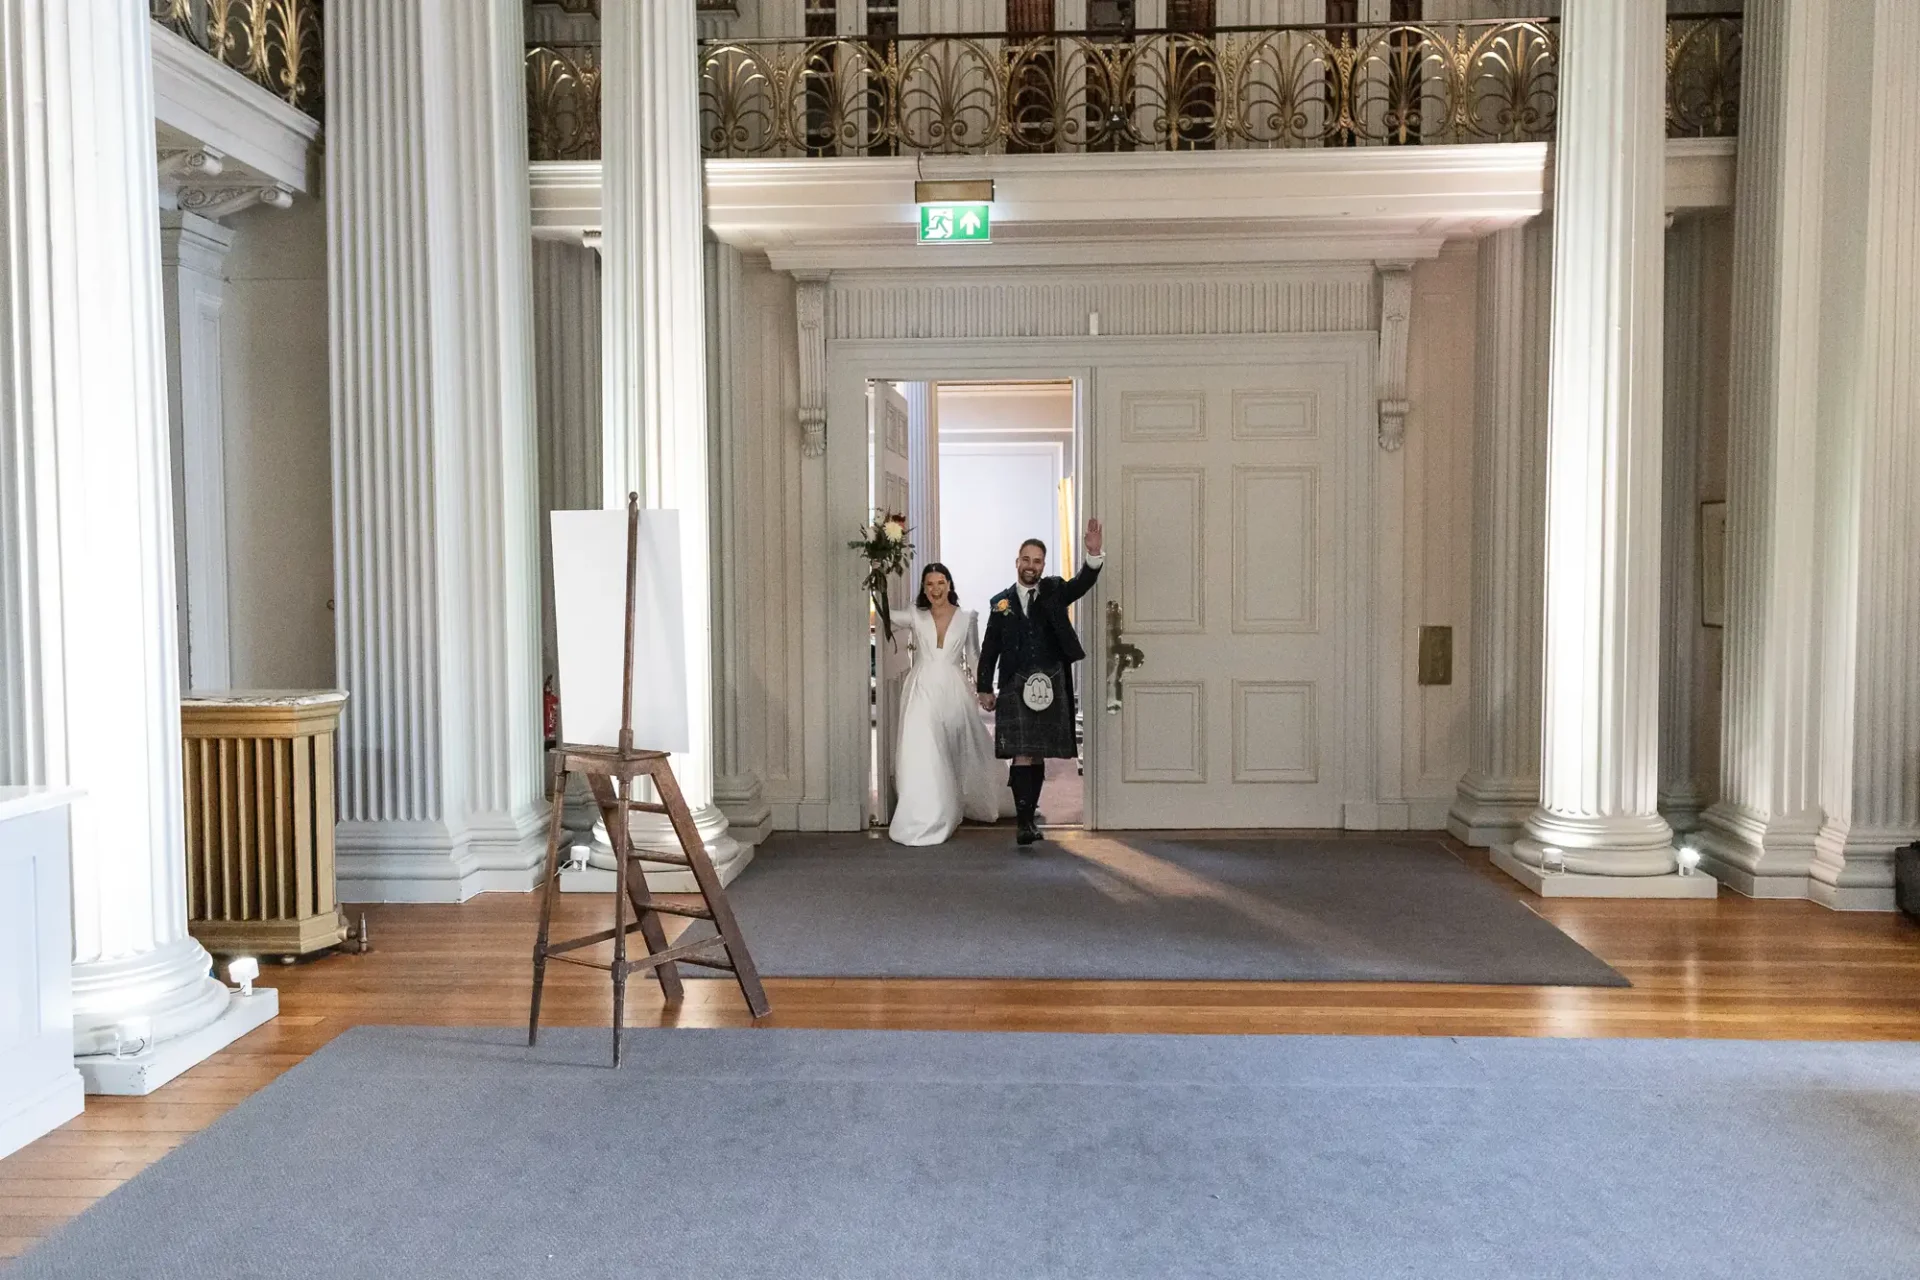 A bride in a white dress and a groom in a kilt walk joyfully through a grand hall doorway, holding hands.